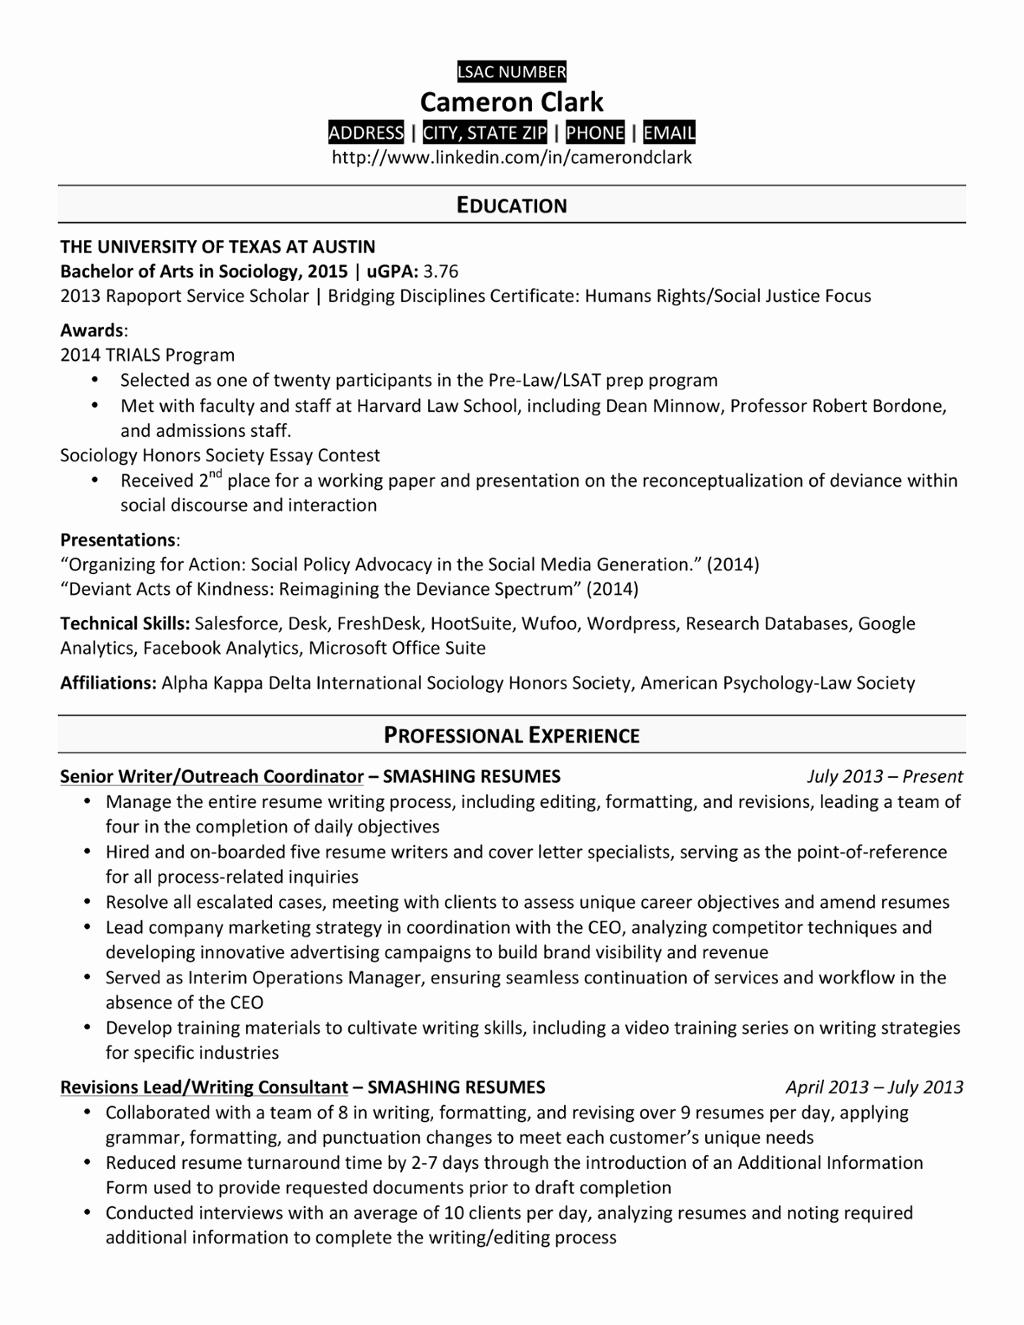 Resumes for High School Graduate Awesome A Law School Resume that Made the Cut